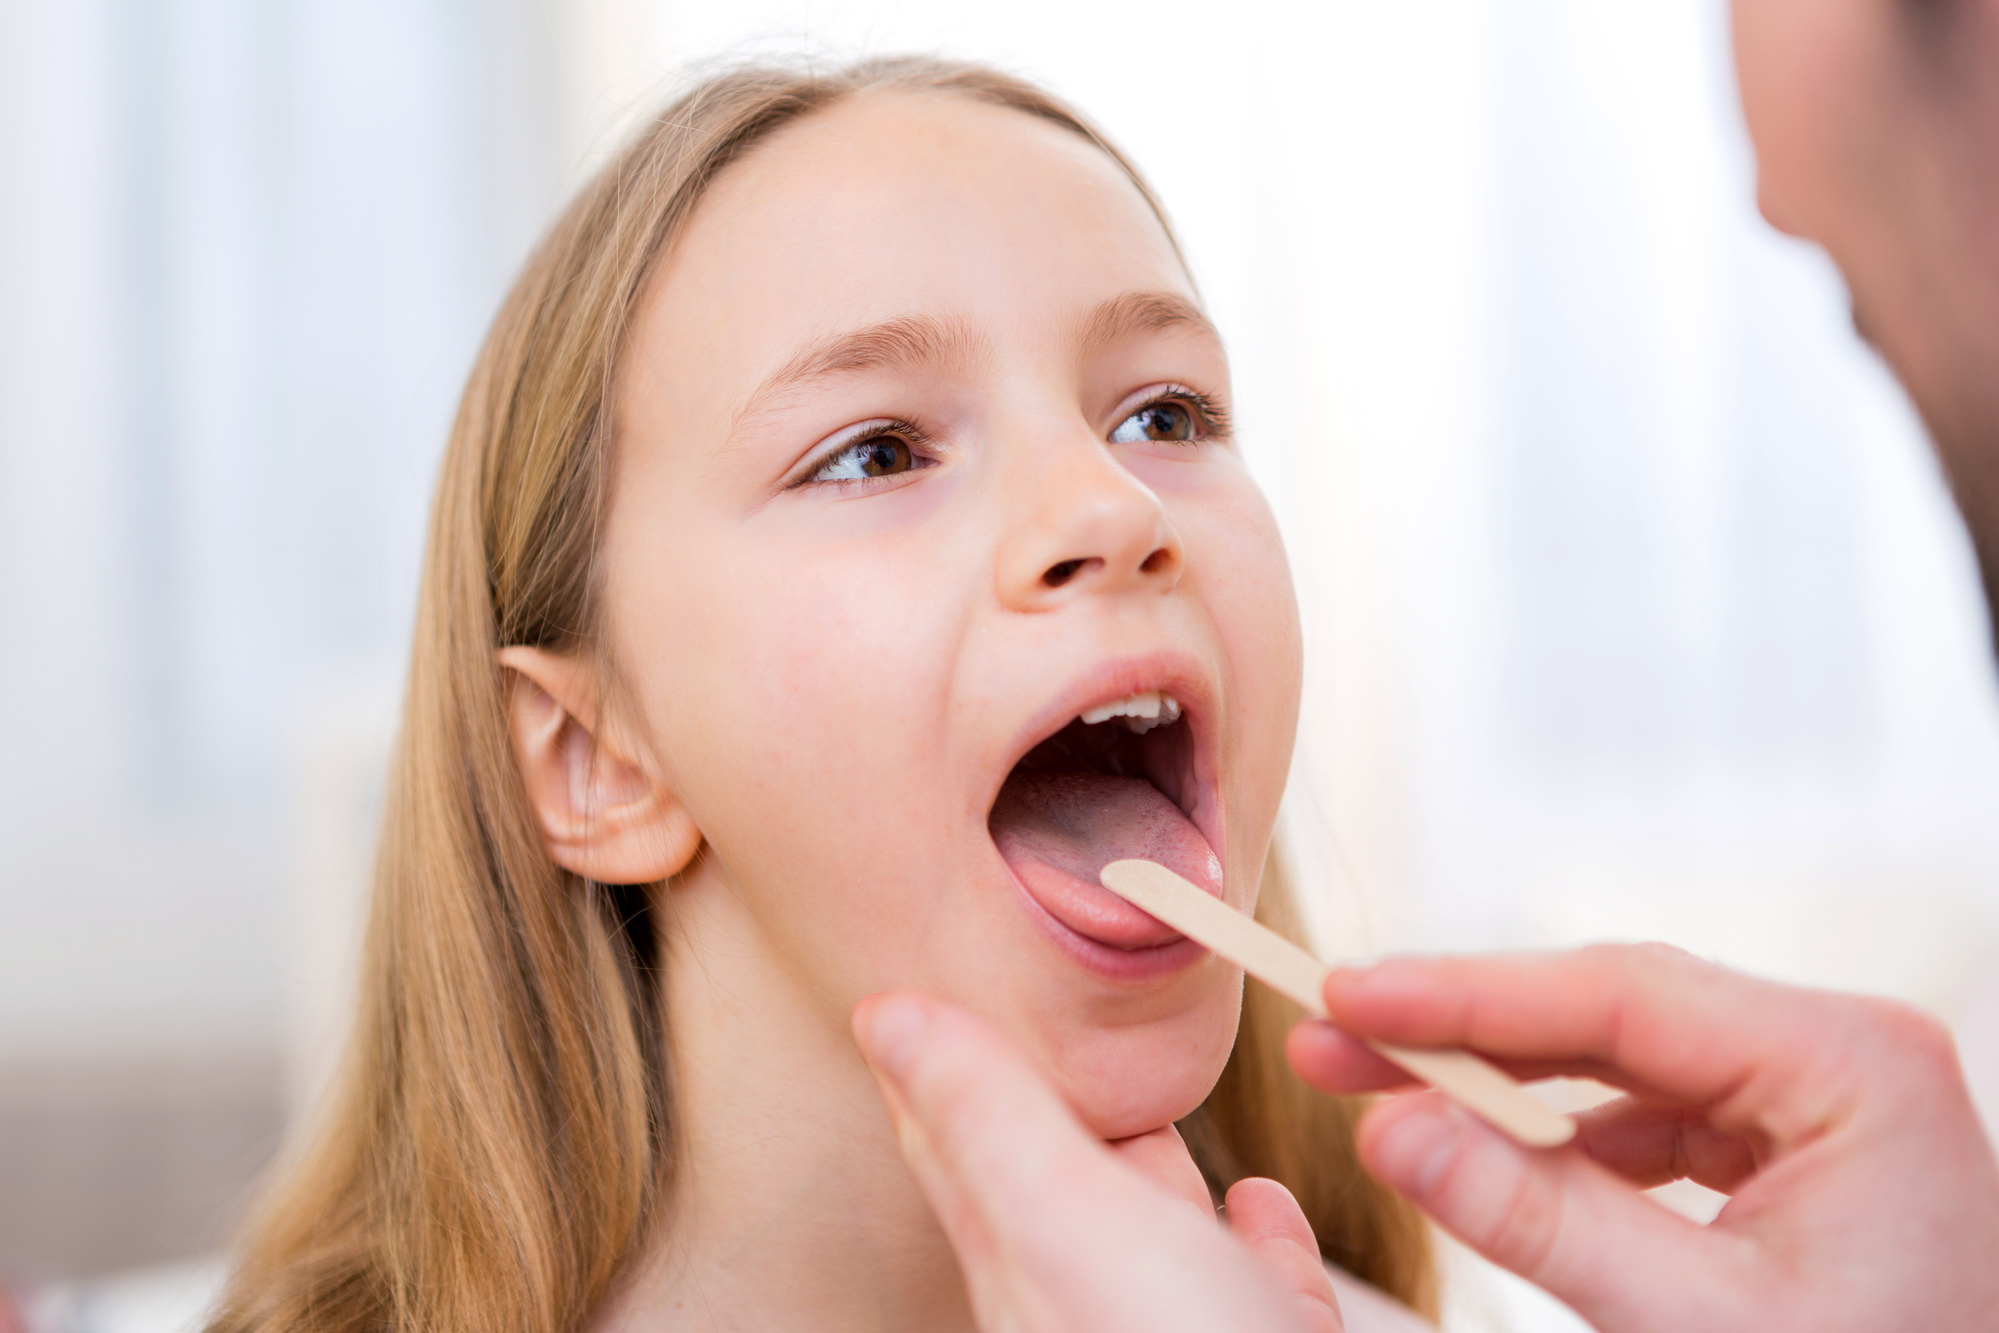 A young girl opens her mouth wide for a throat examination by a healthcare professional.